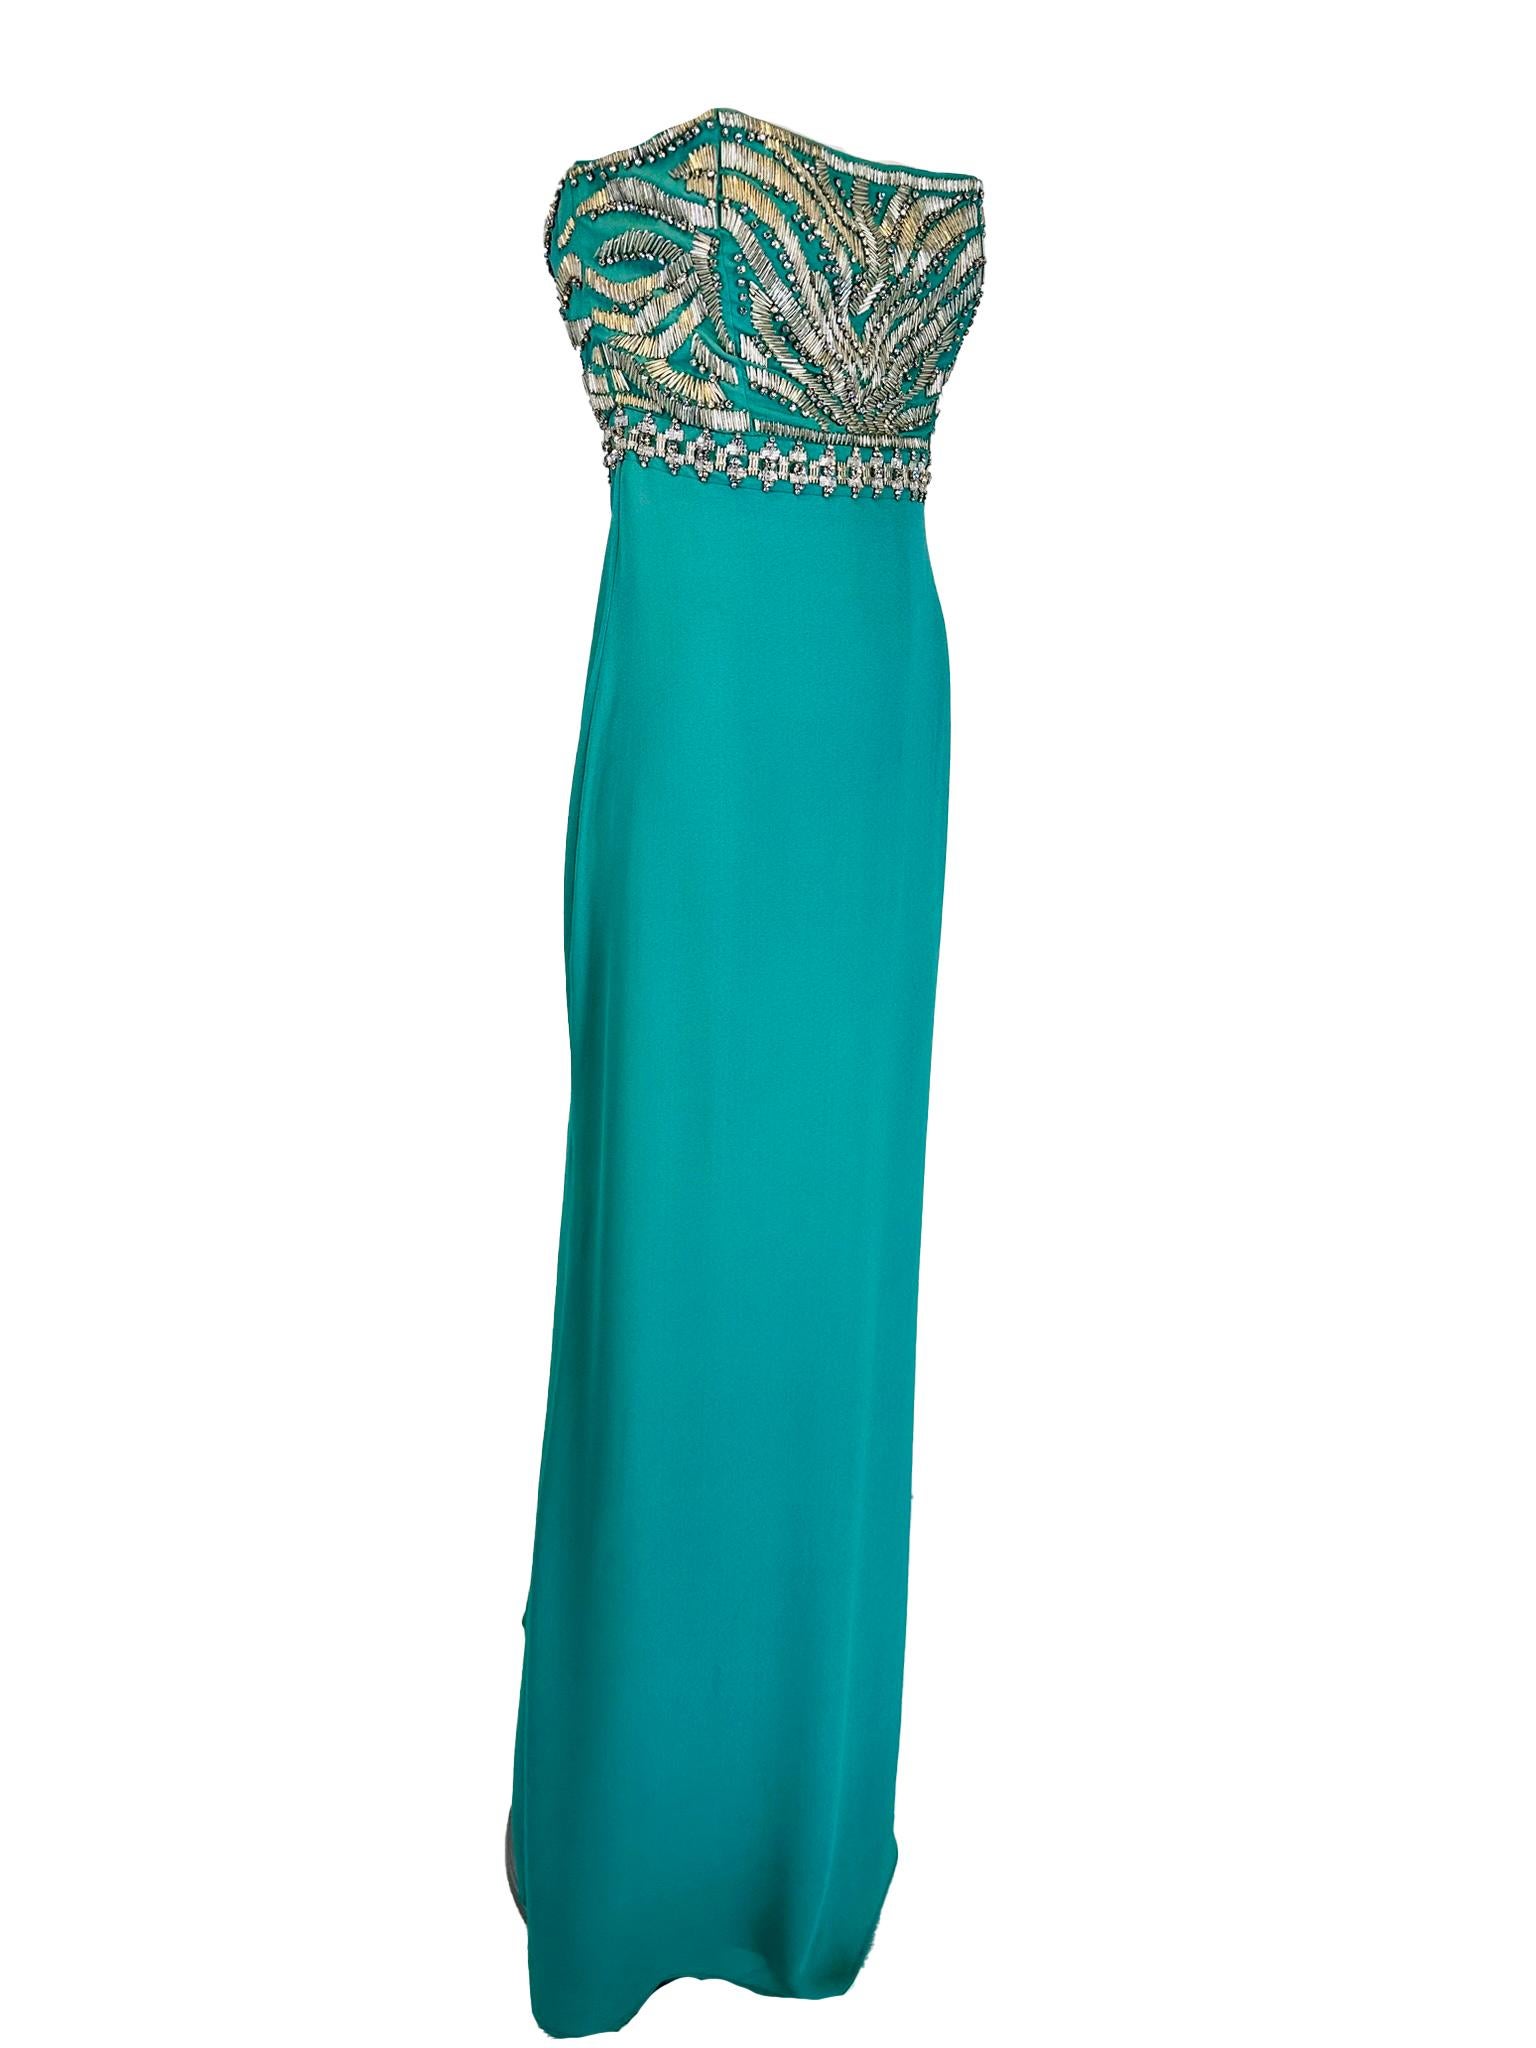 Roberto Cavalli strapless turquoise silk evening gown with a with crystal rhinestone bodice 42. Gorgeous gown with a narrow empire bodice covered with crystal rhinestones & silver metal beads. The bias cut dress is fitted through the torso and falls